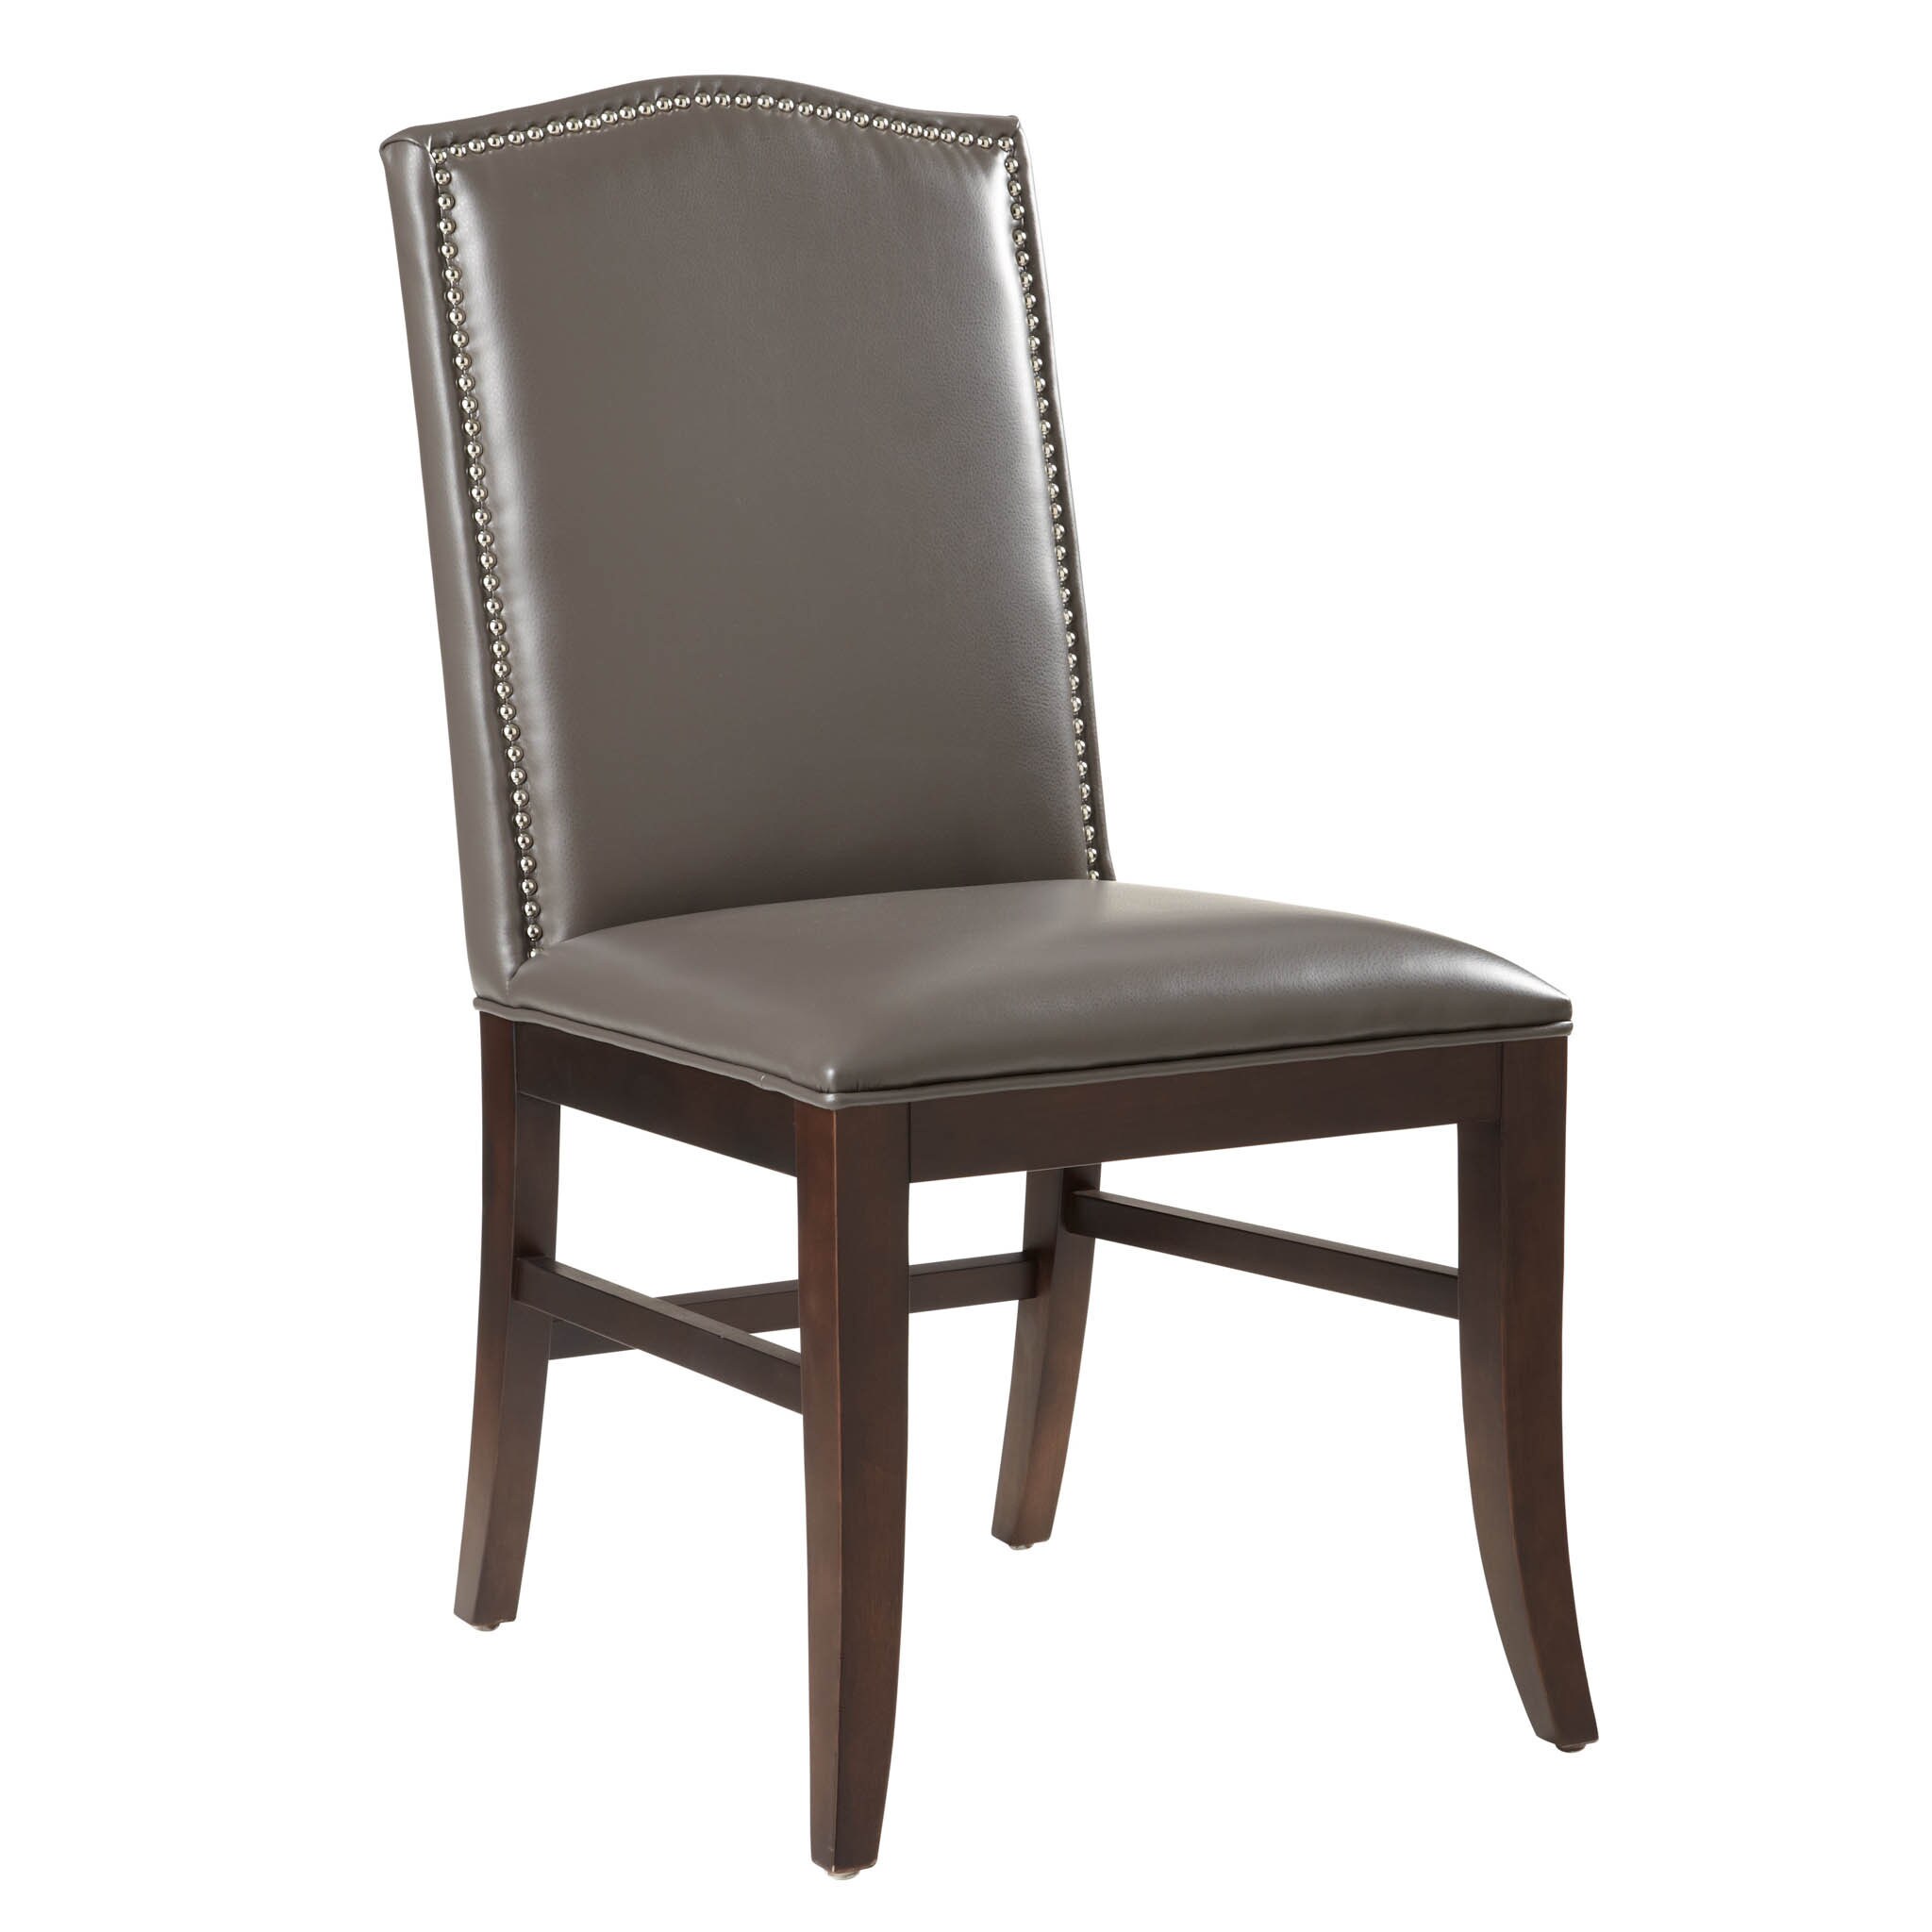 Sunpan Grey Leather Dining Chair (Set of 2) Today $587.99